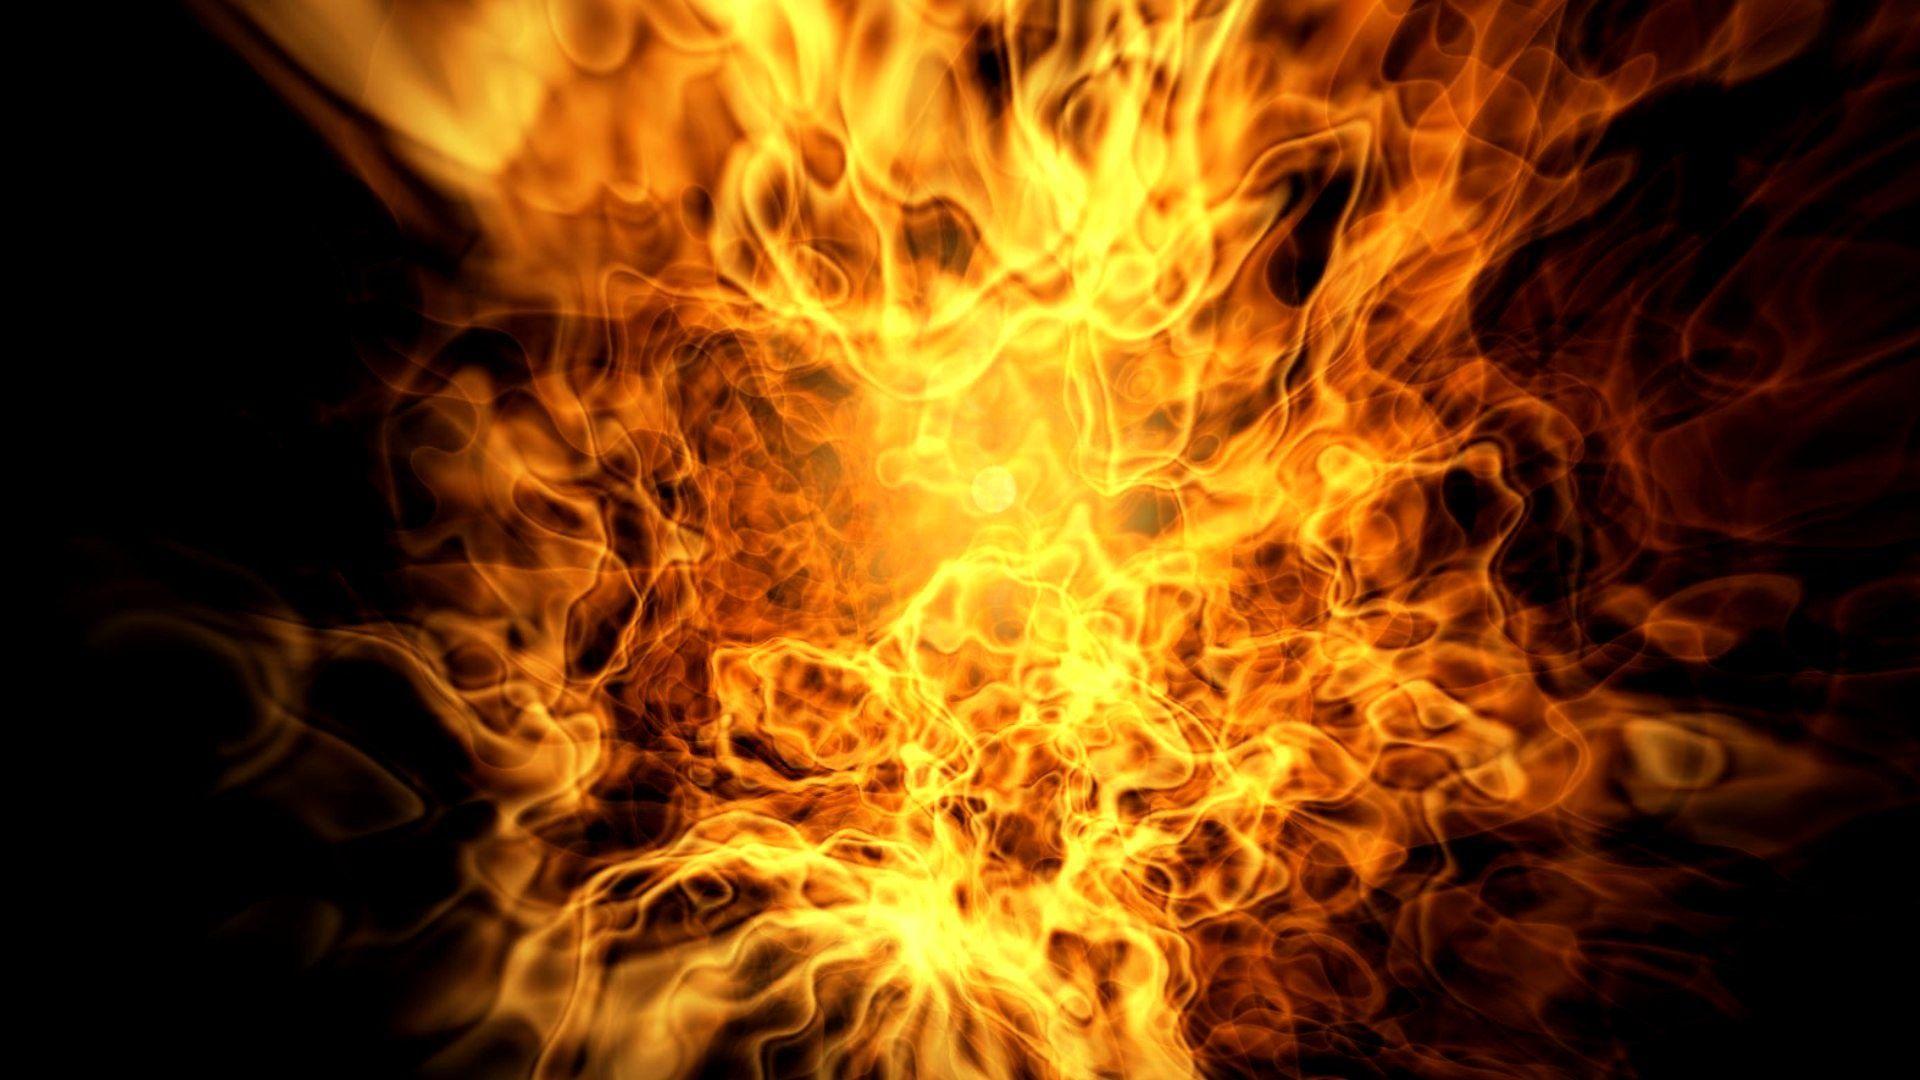 Abstract Fire Wallpaper 49348 1920x1080 px